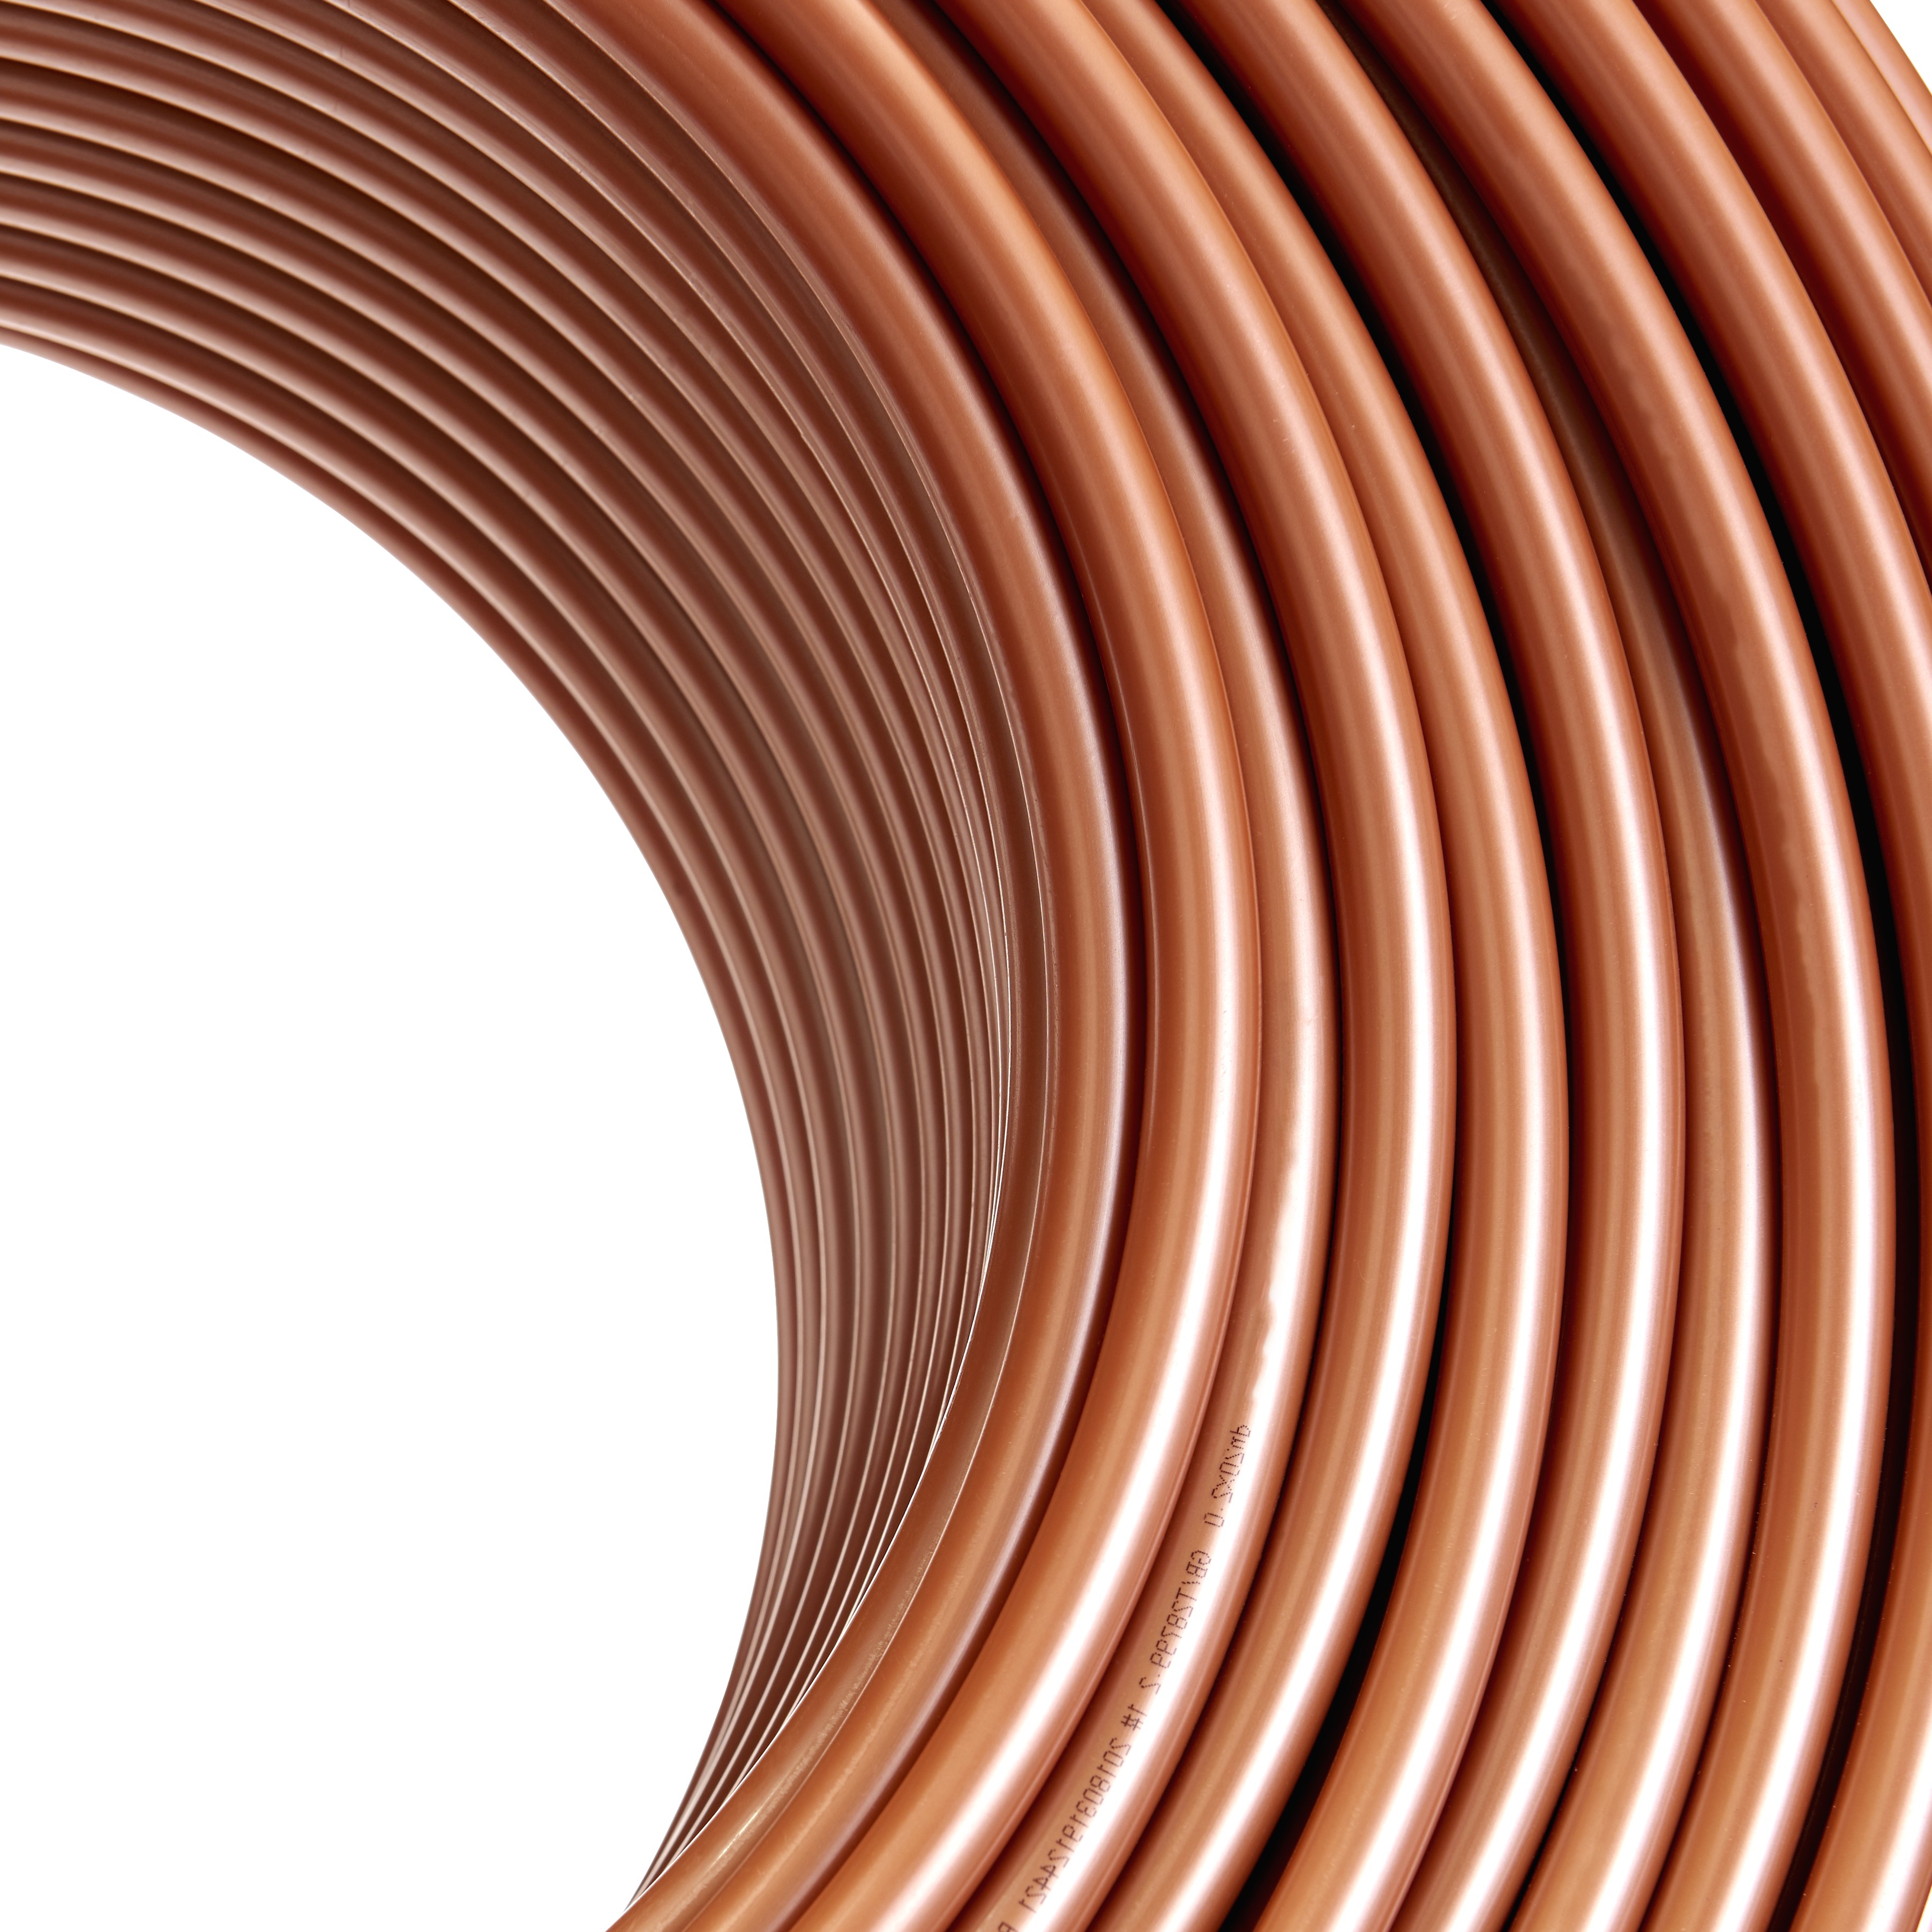 Rose gold floor heating coil